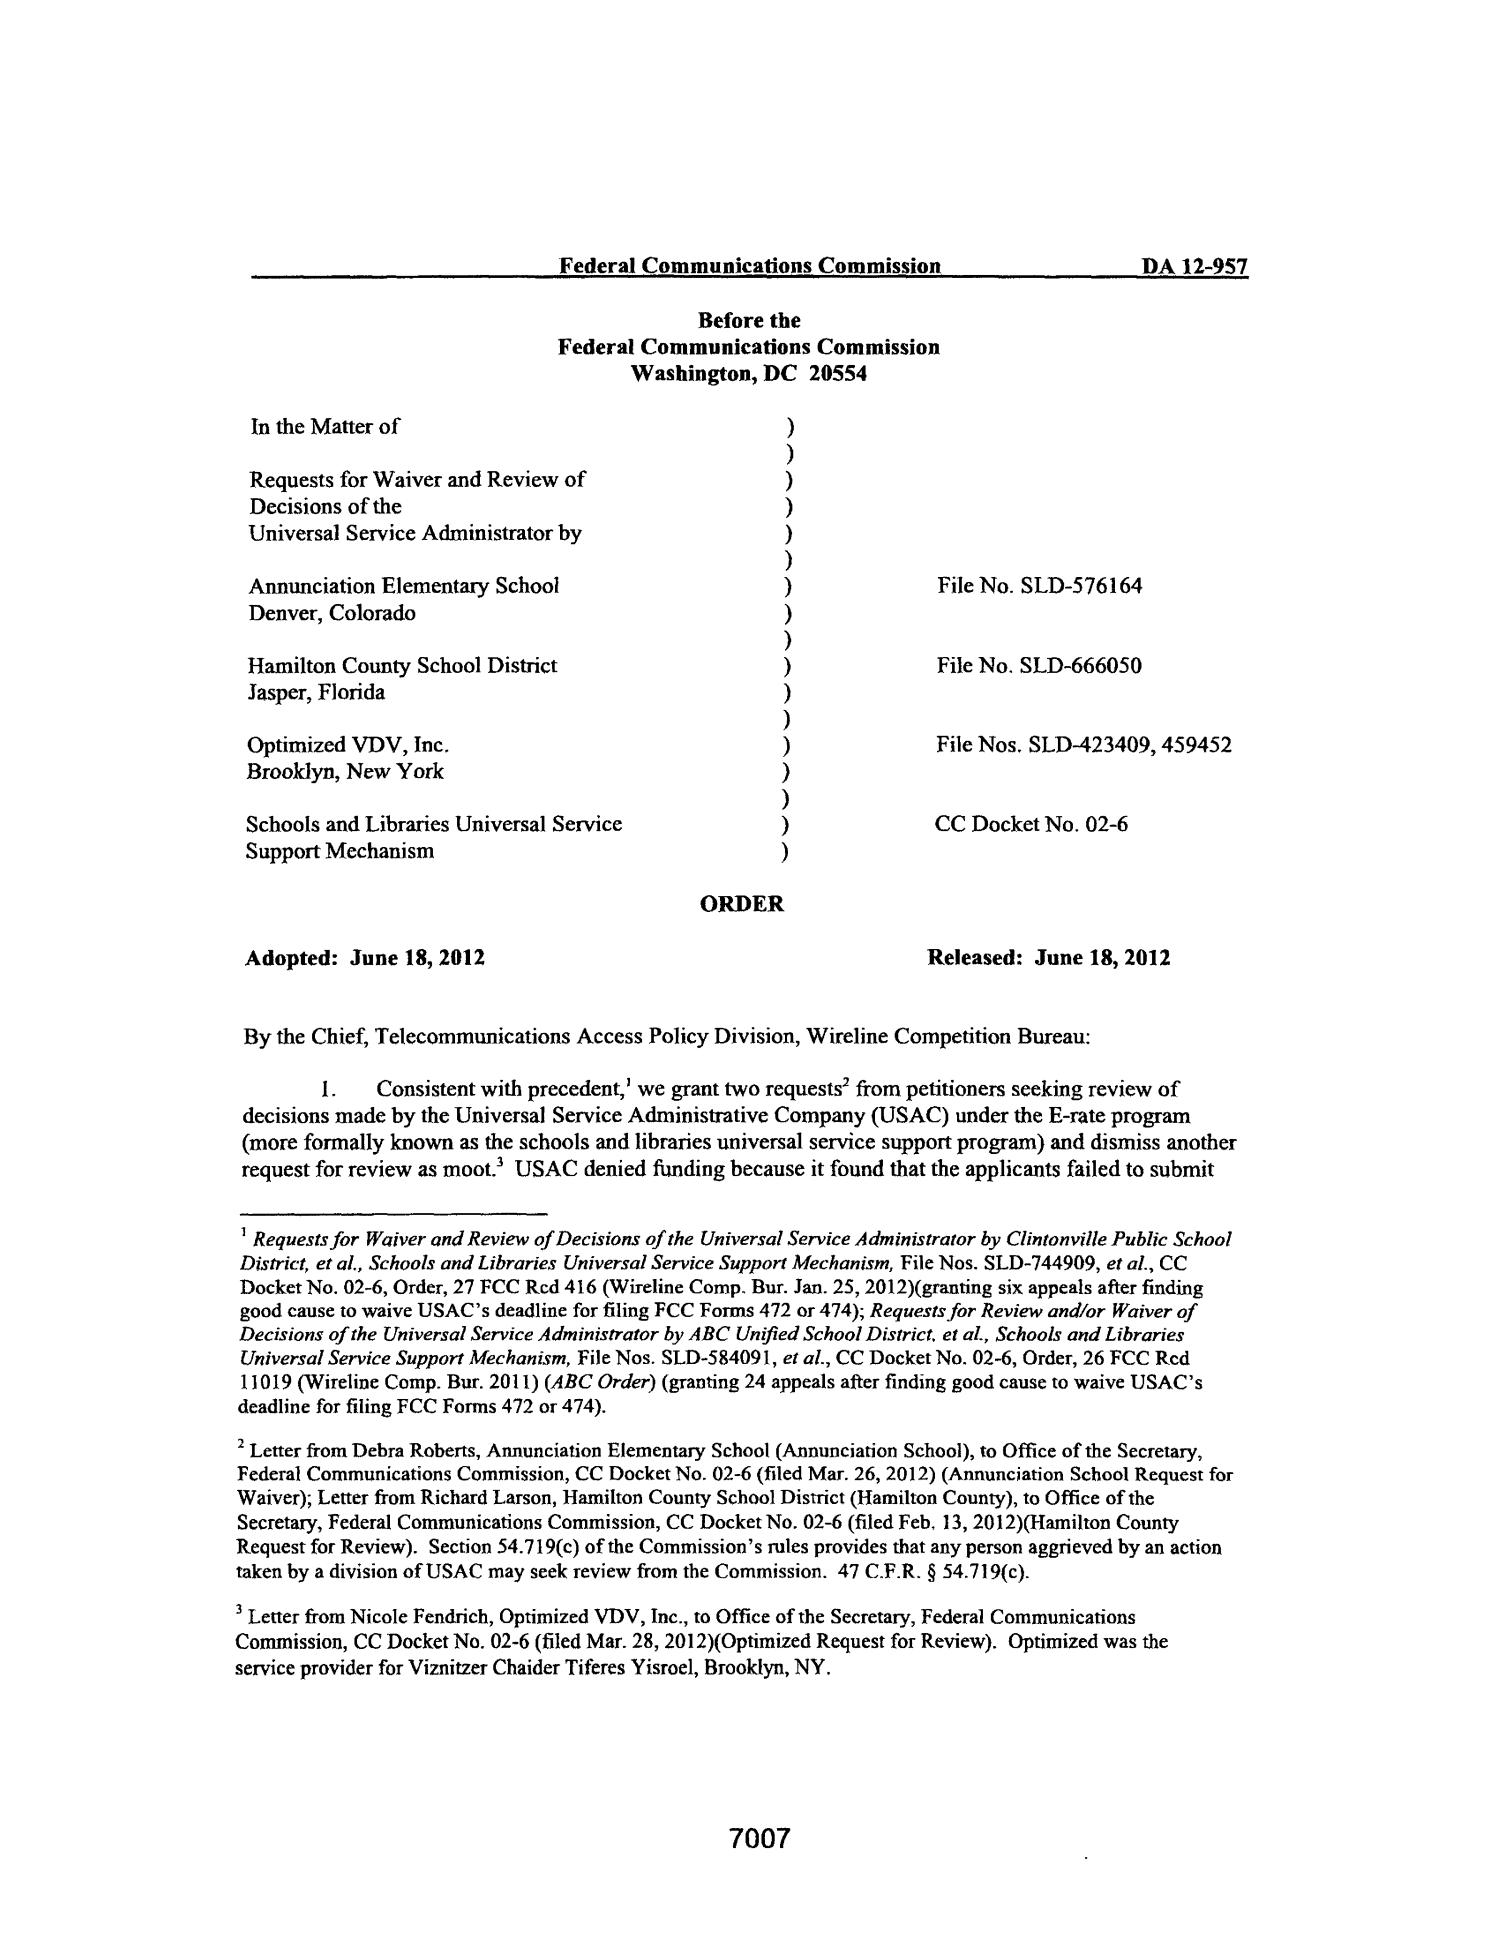 FCC Record, Volume 27, No. 9, Pages 6955 to 7935, June 18 - July 12, 2012
                                                
                                                    7007
                                                